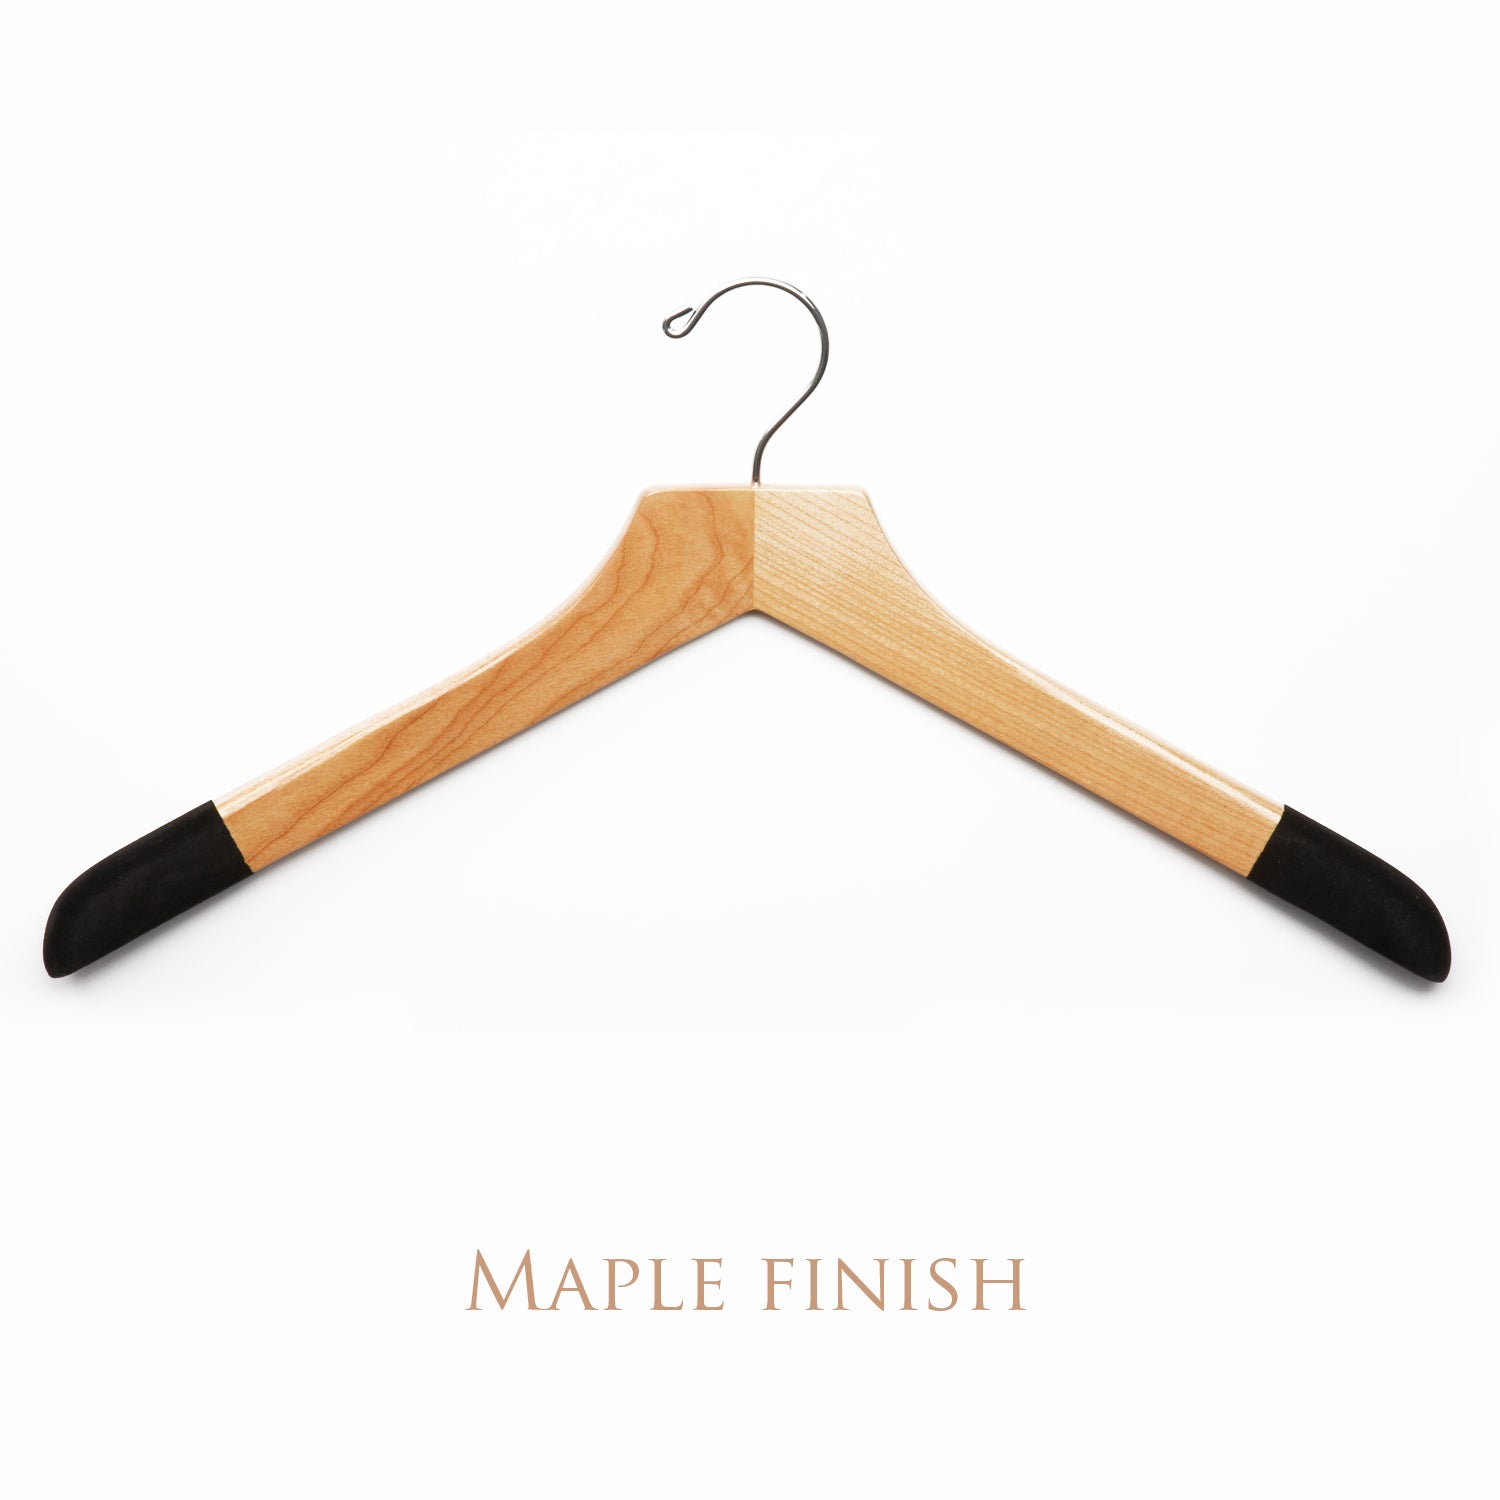 A Extra-Large 21" Luxury Wooden Sweater and Polo Hanger from KirbyAllison.com with a maple finish and shoulder flocking.